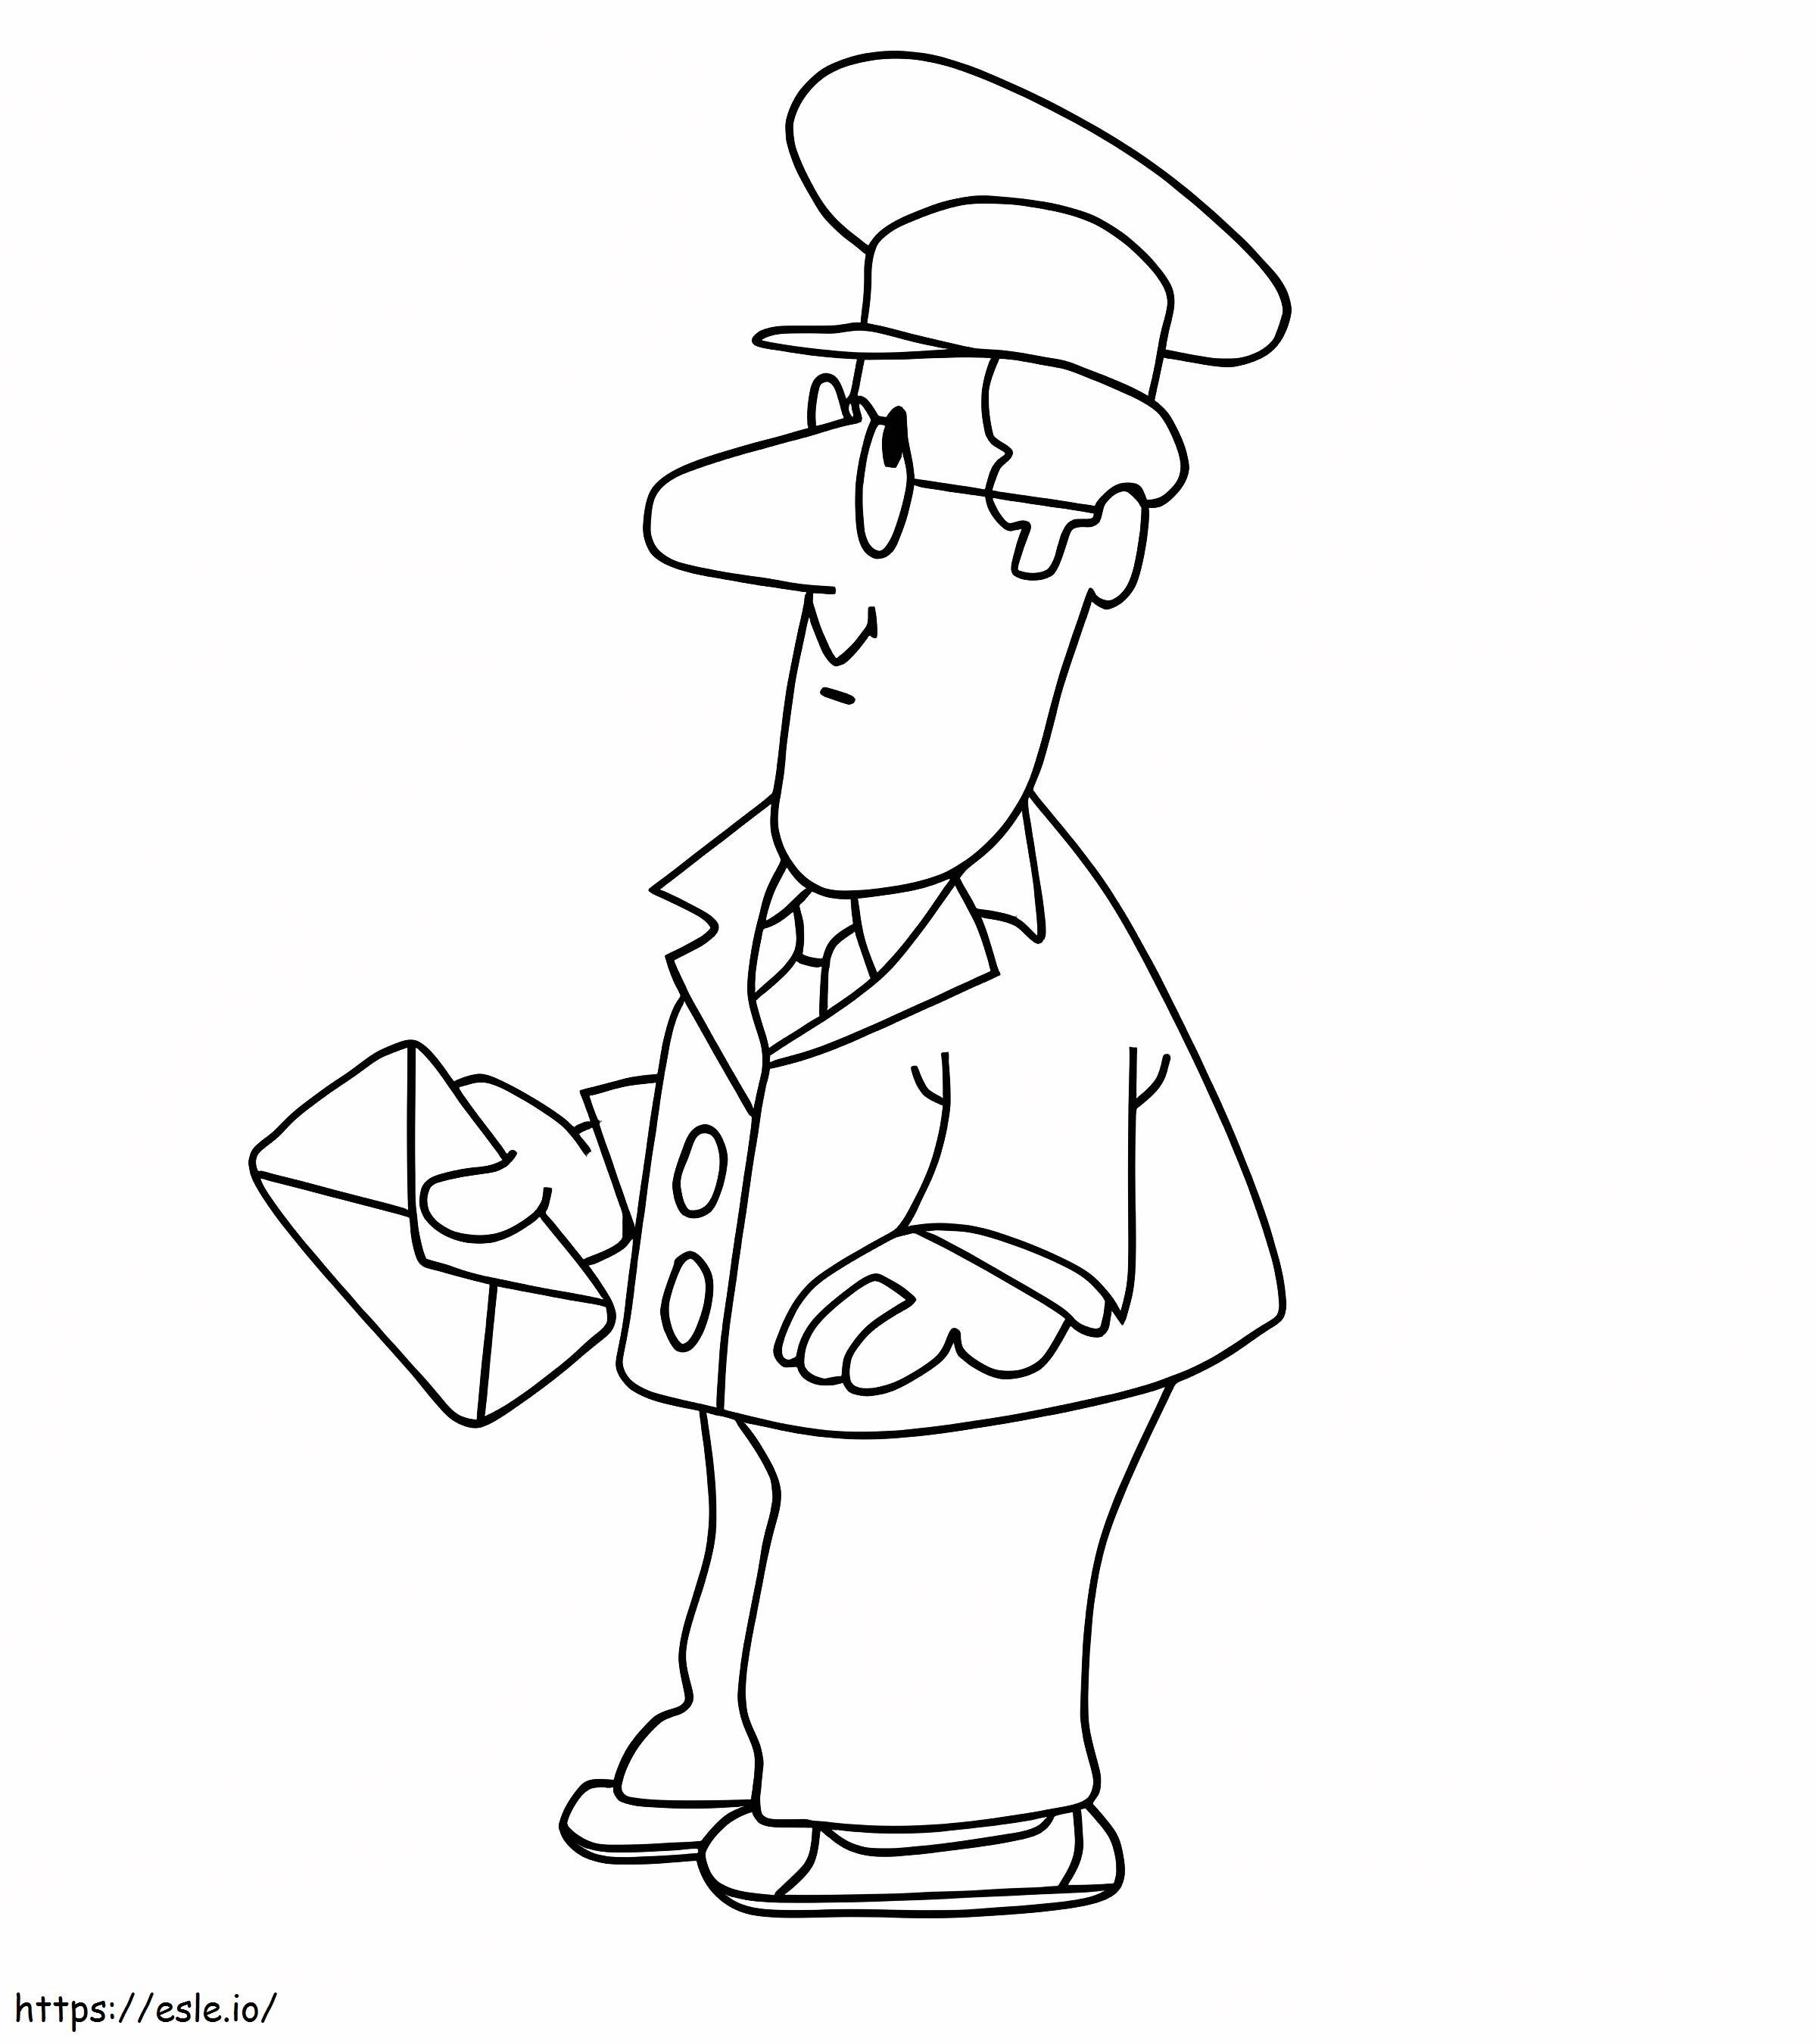 Postman Pat Holding Letter coloring page